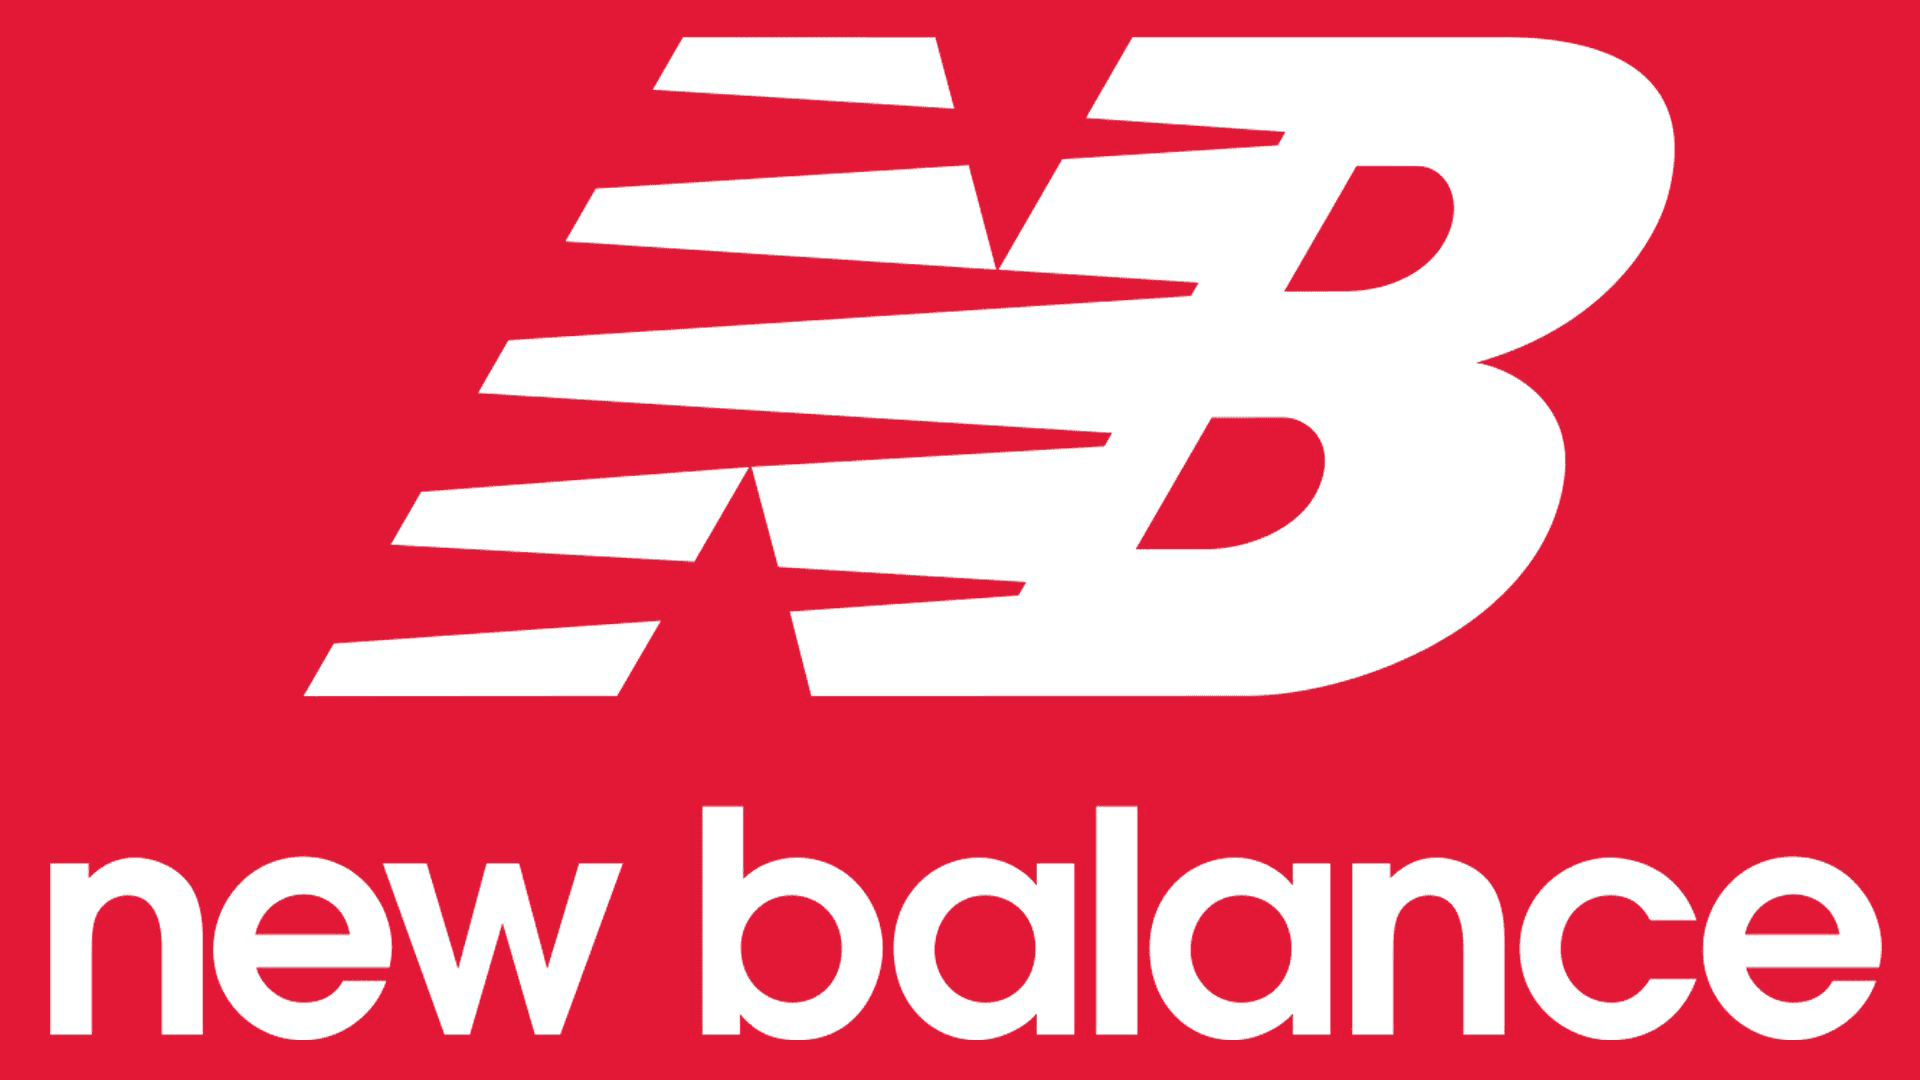 New Balance Logo and sign, new logo meaning and history, PNG, SVG